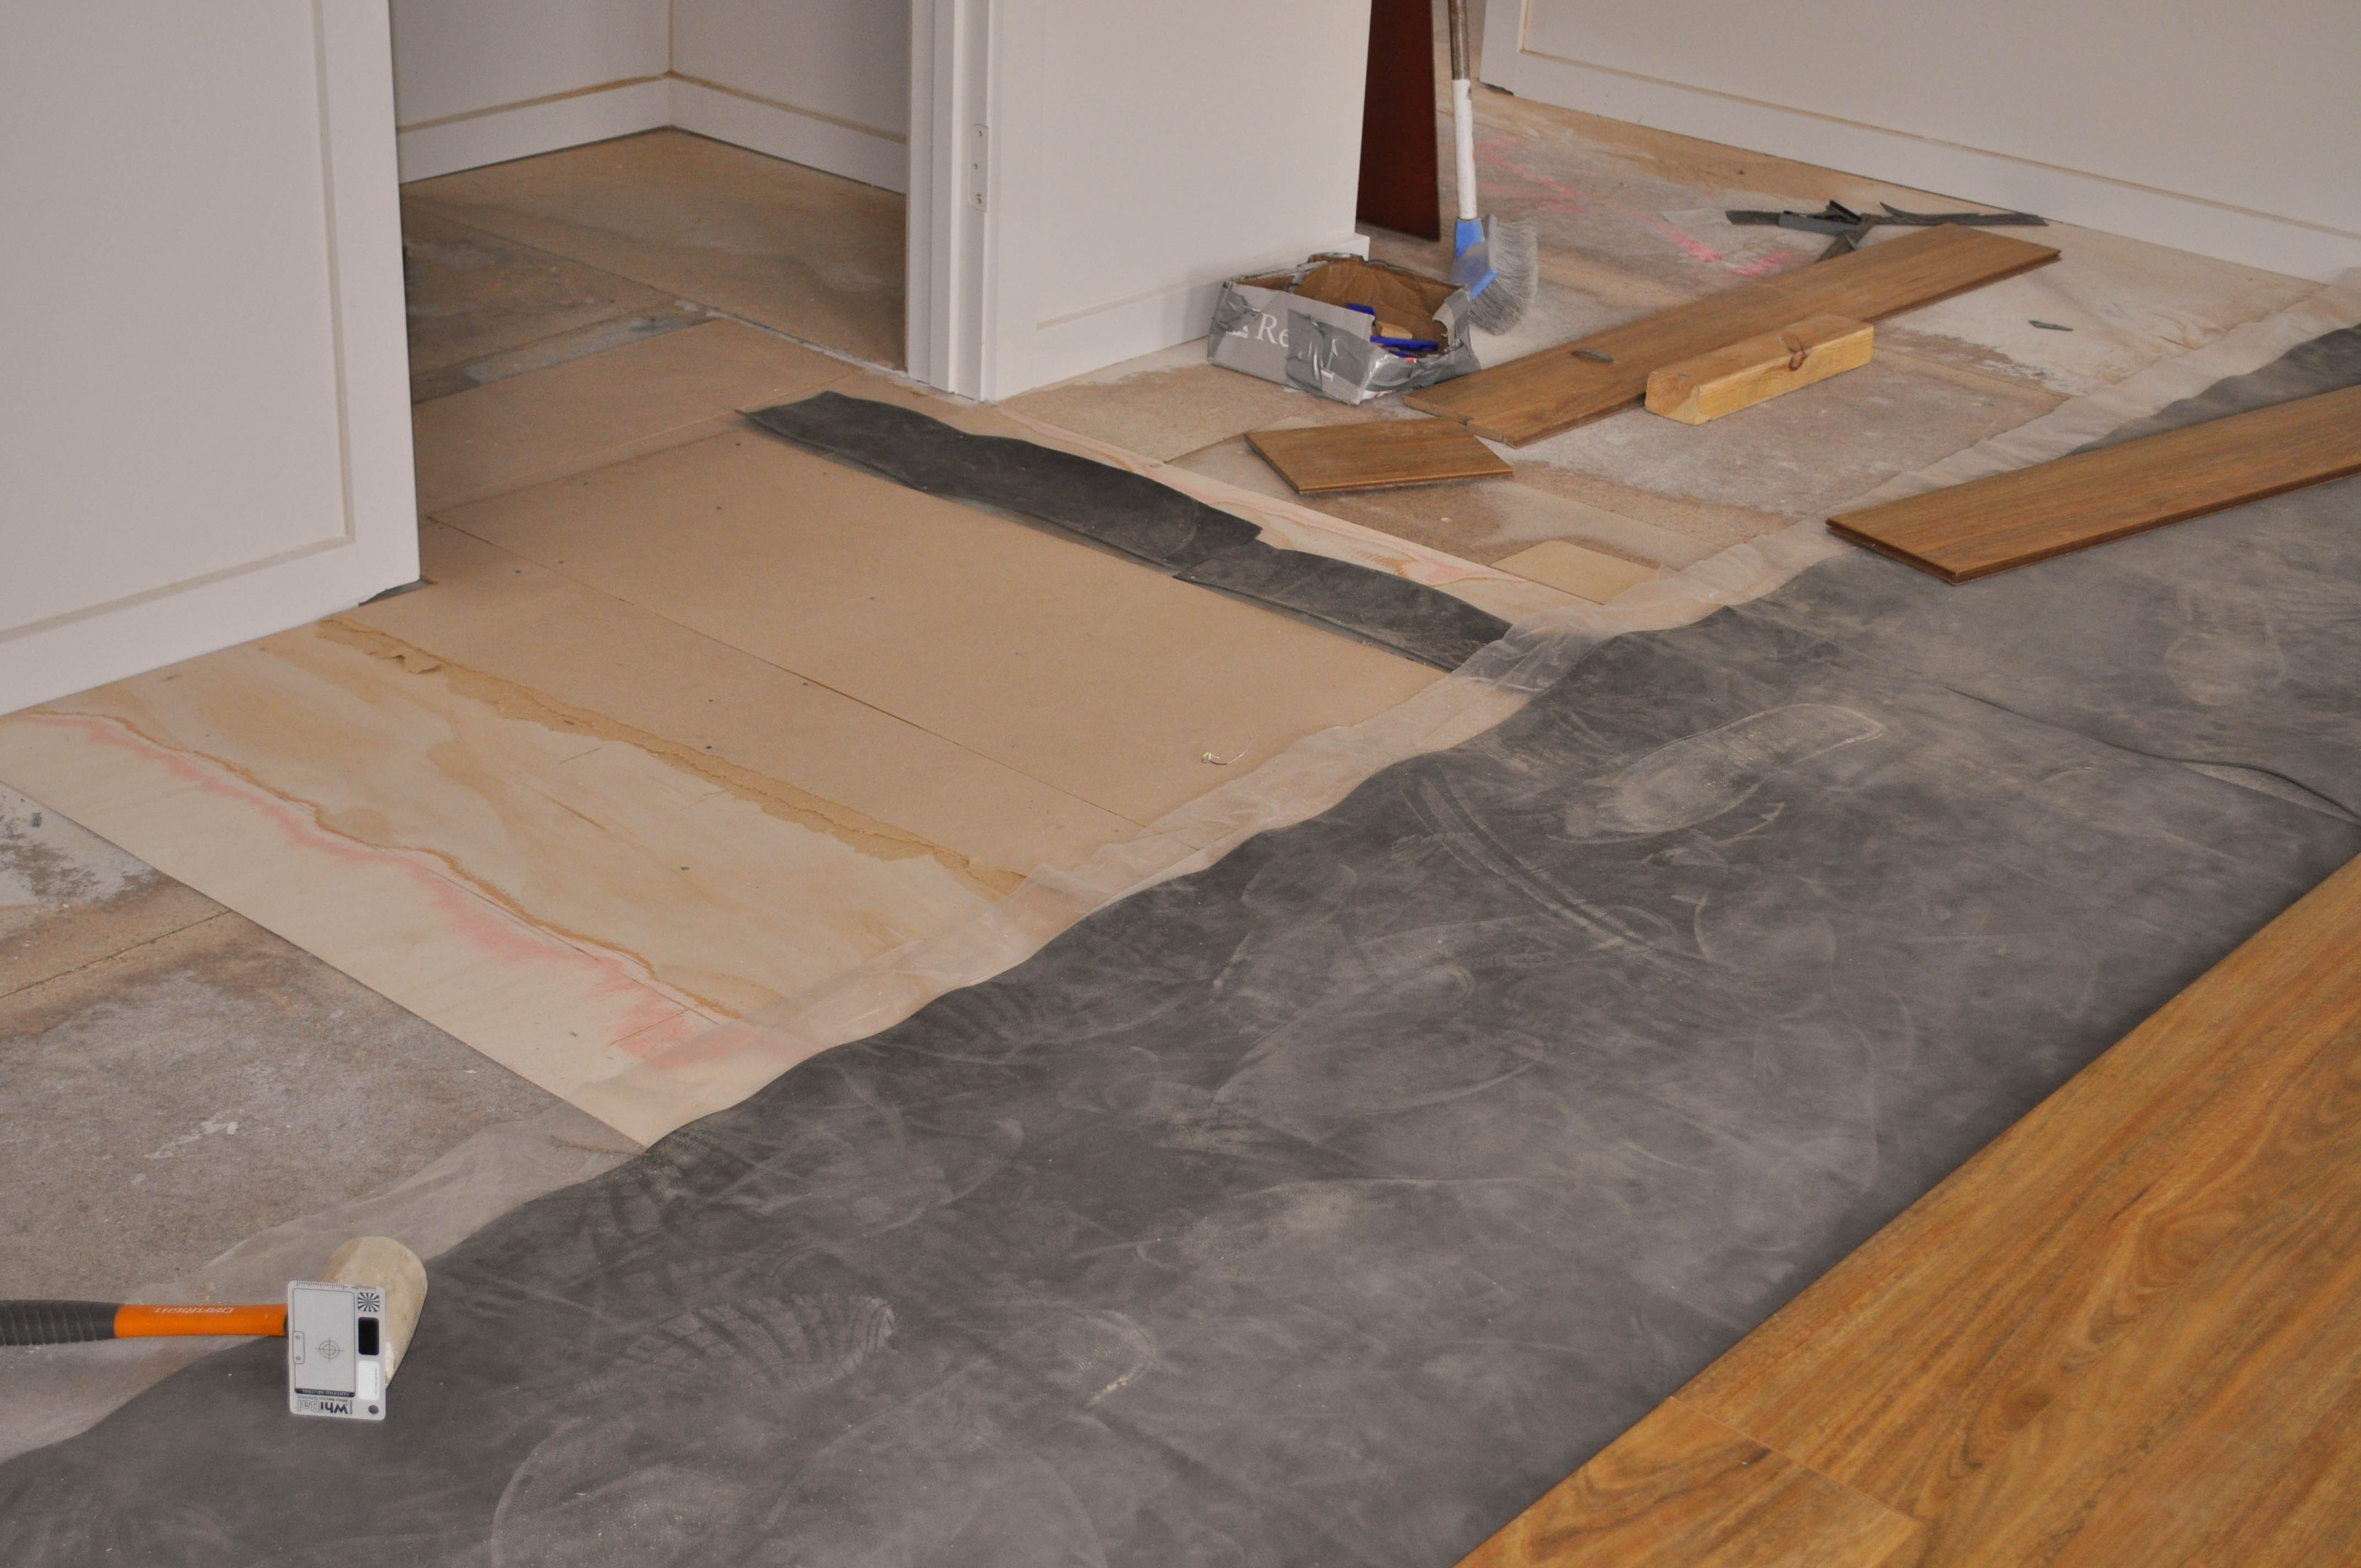 the picture is showing a particle board subfloor where levelling work has taken place. The low parts have been filled in with
  3mm thick plywood and the whole floor sanded to remove any imperfections. Following this the laminate undelay has been partially laid on top of which the 12mm thick spotted gum 
  floor boards have started to be laid.The laminate flooring was installed in a room in a house in the suburb of Werribee Vic 3340 by Concord Floors.